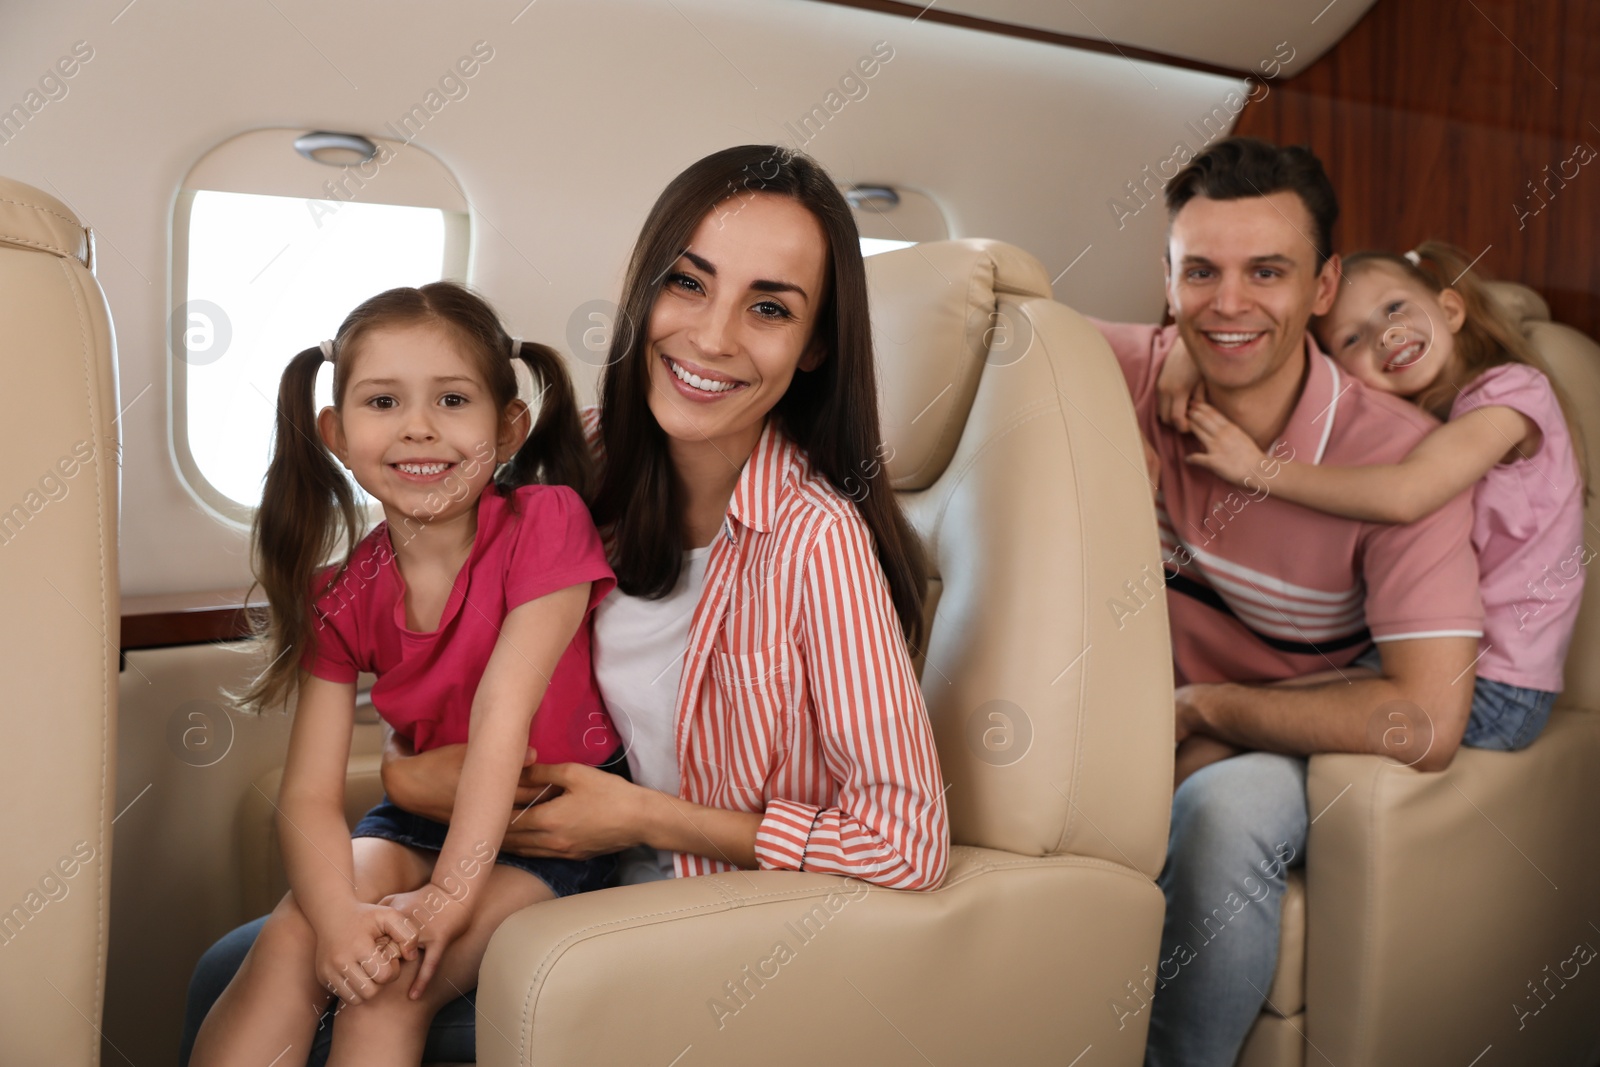 Photo of Happy family together in airplane during flight